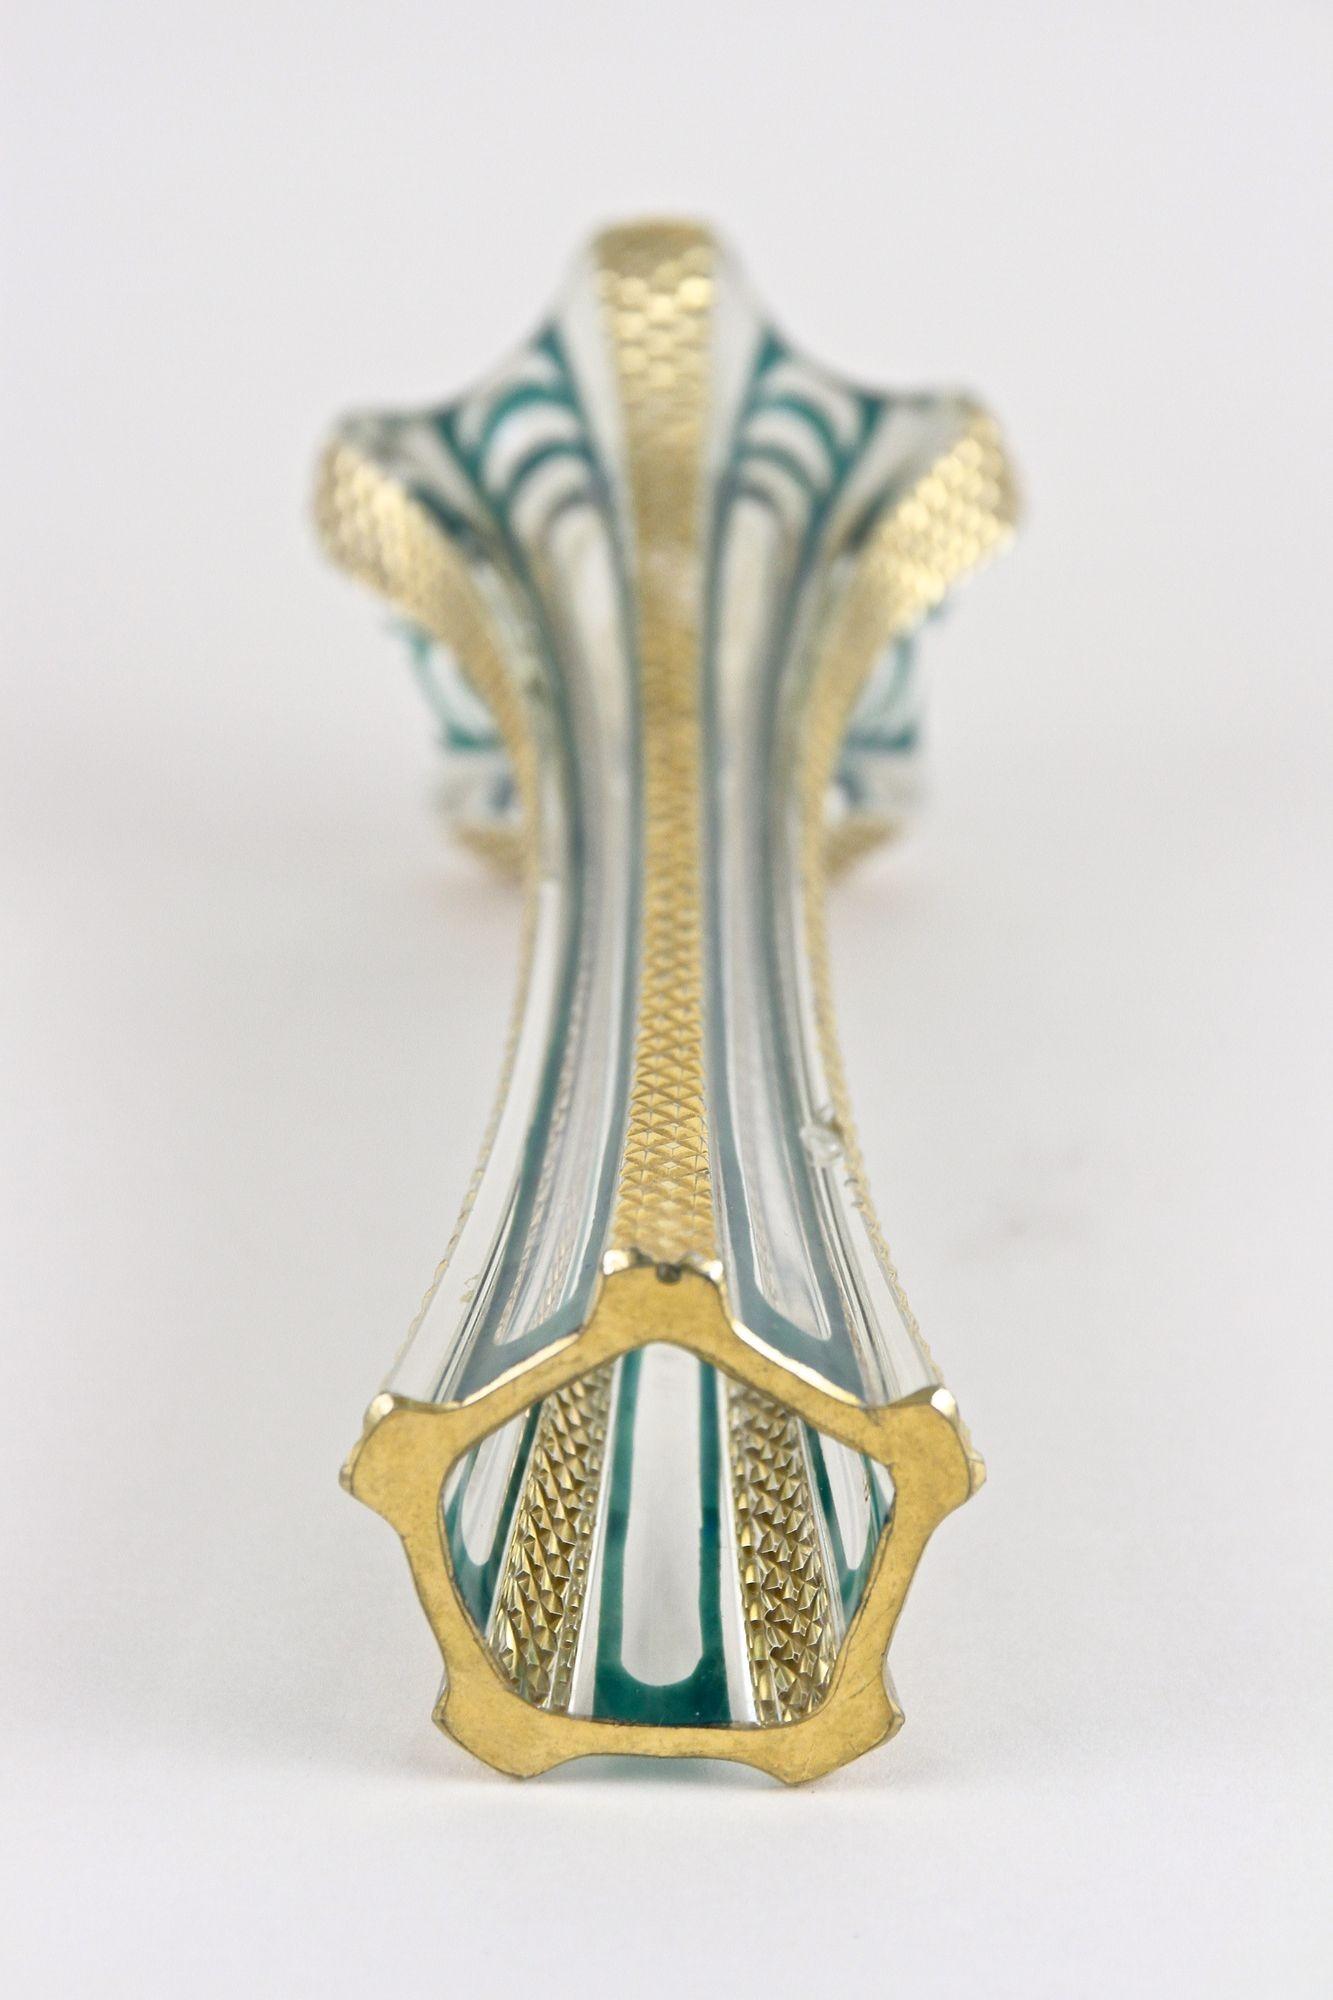 Murano Glass Vase With Gold Accents, Early 20th Century - Italy ca. 1930 For Sale 13